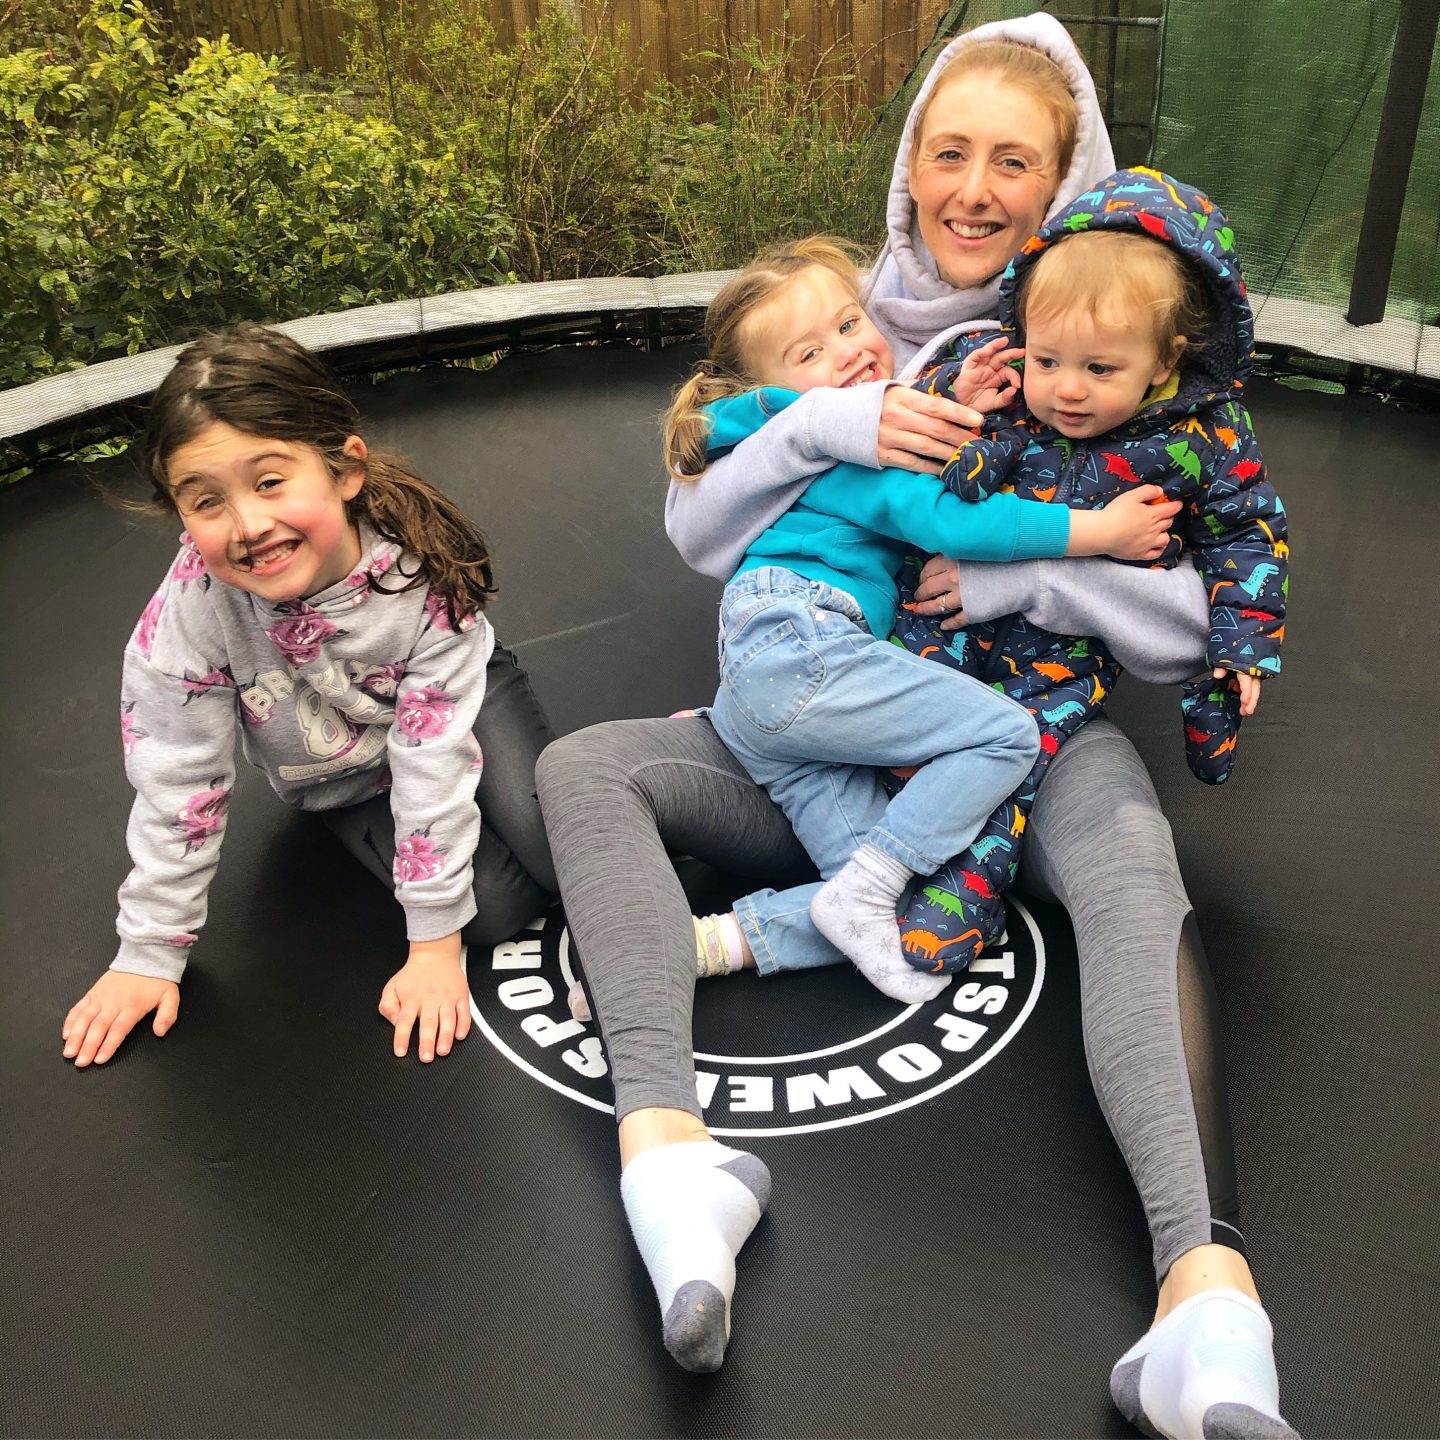 lockdown and I'm tired - Mum and kids on the trampoline